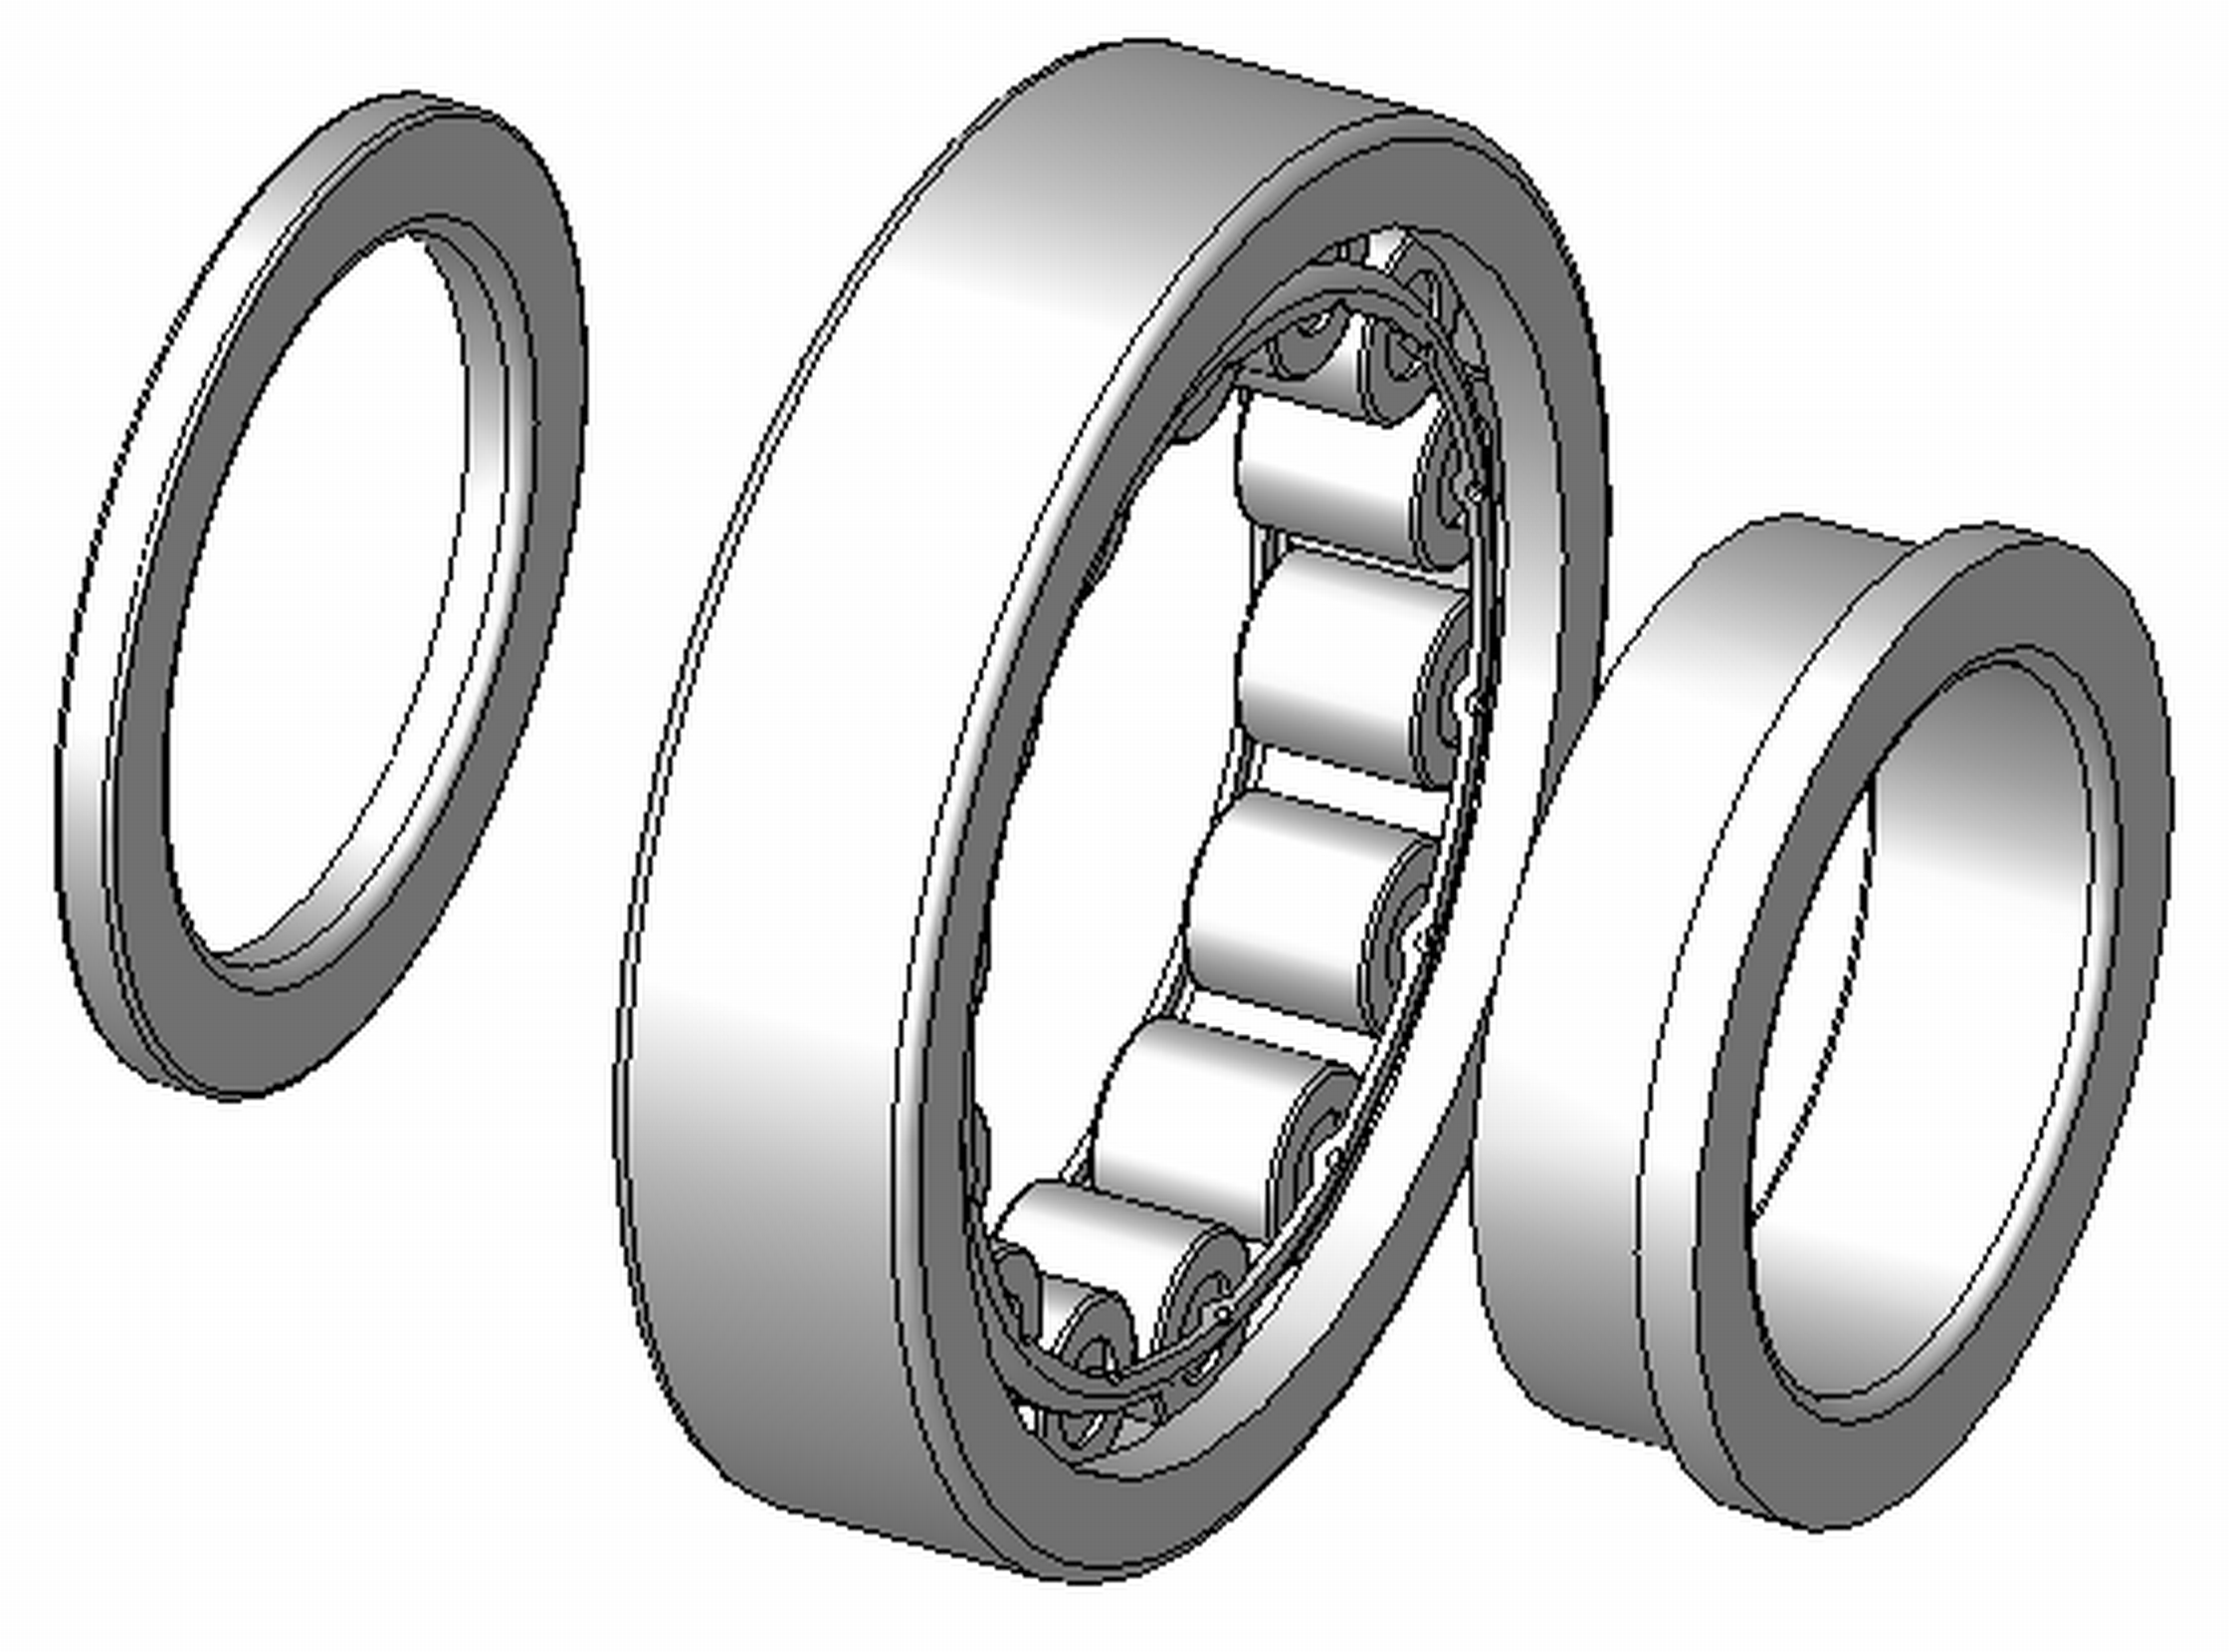 "NUP307ECPC3 - NUP Type Cylindrical Roller Bearing - 35 x 80 x 21"